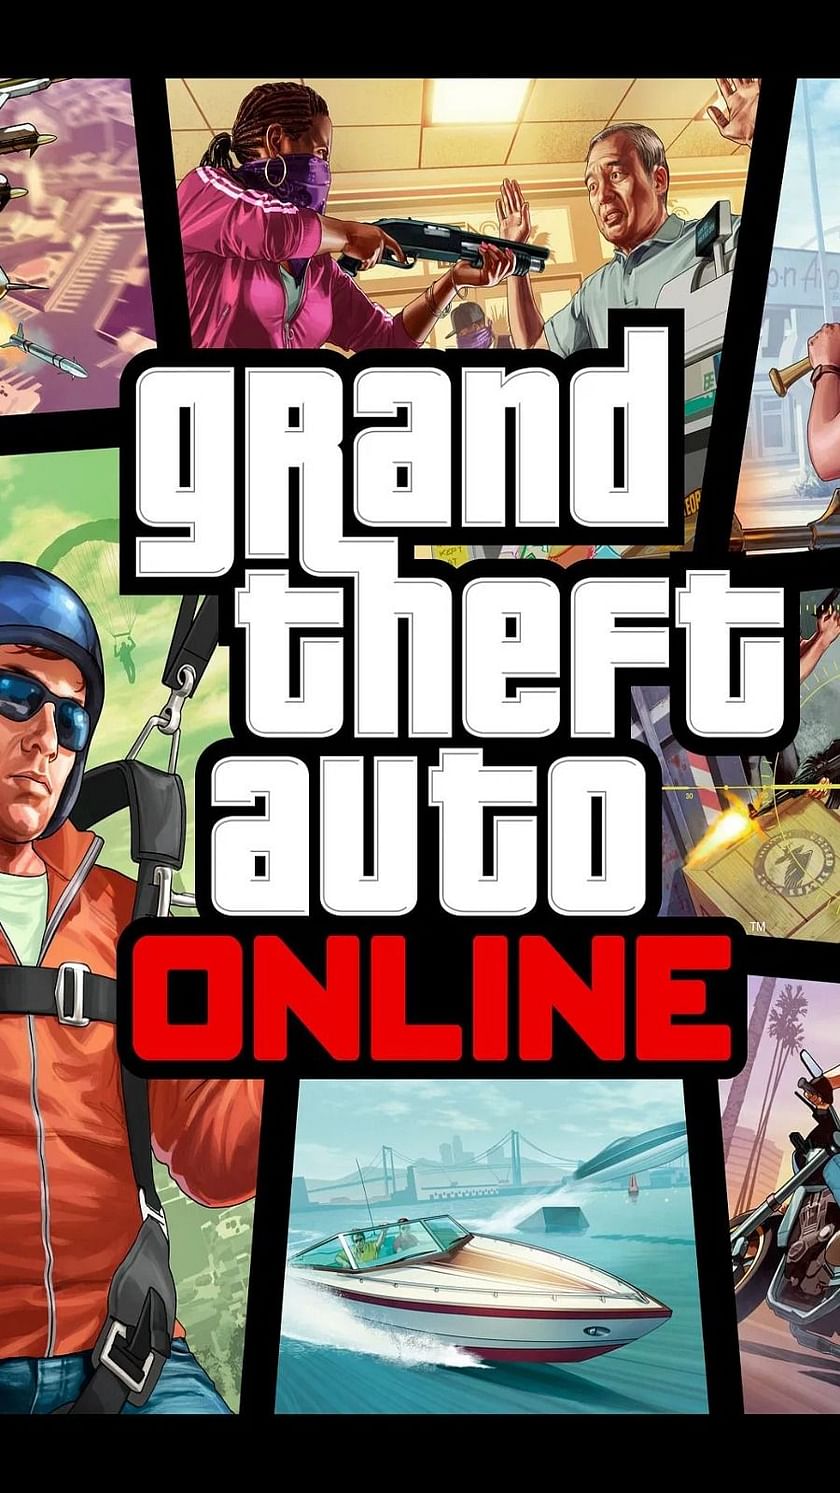 GTA 5 Online Update For PS3 And Xbox 360 Now Available To Download